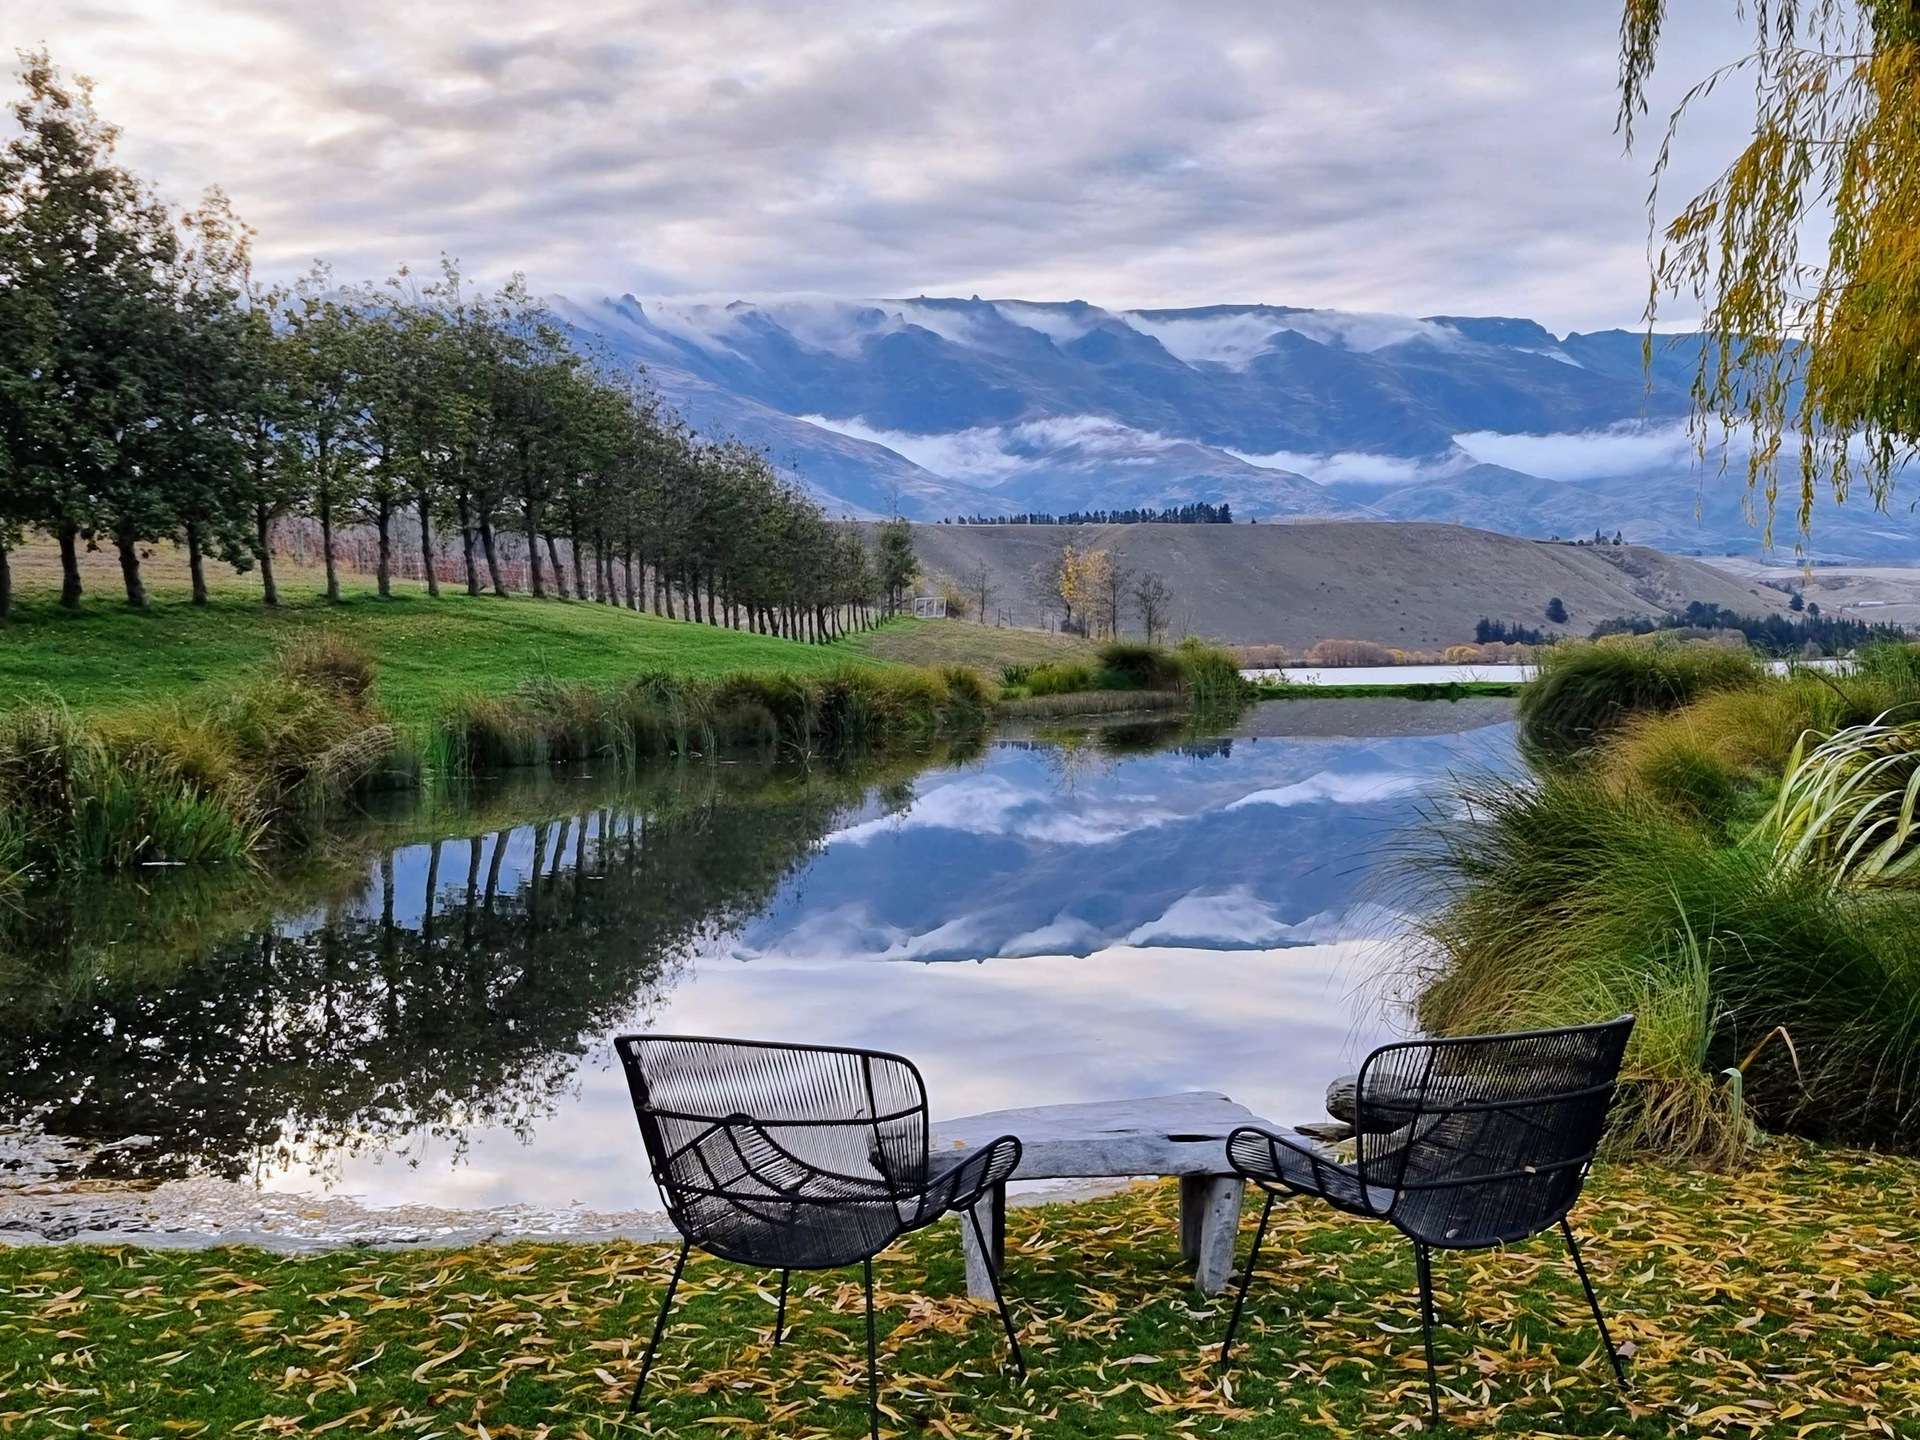 Cloudy Bay opens The Shed in Central Otago, New Zealand